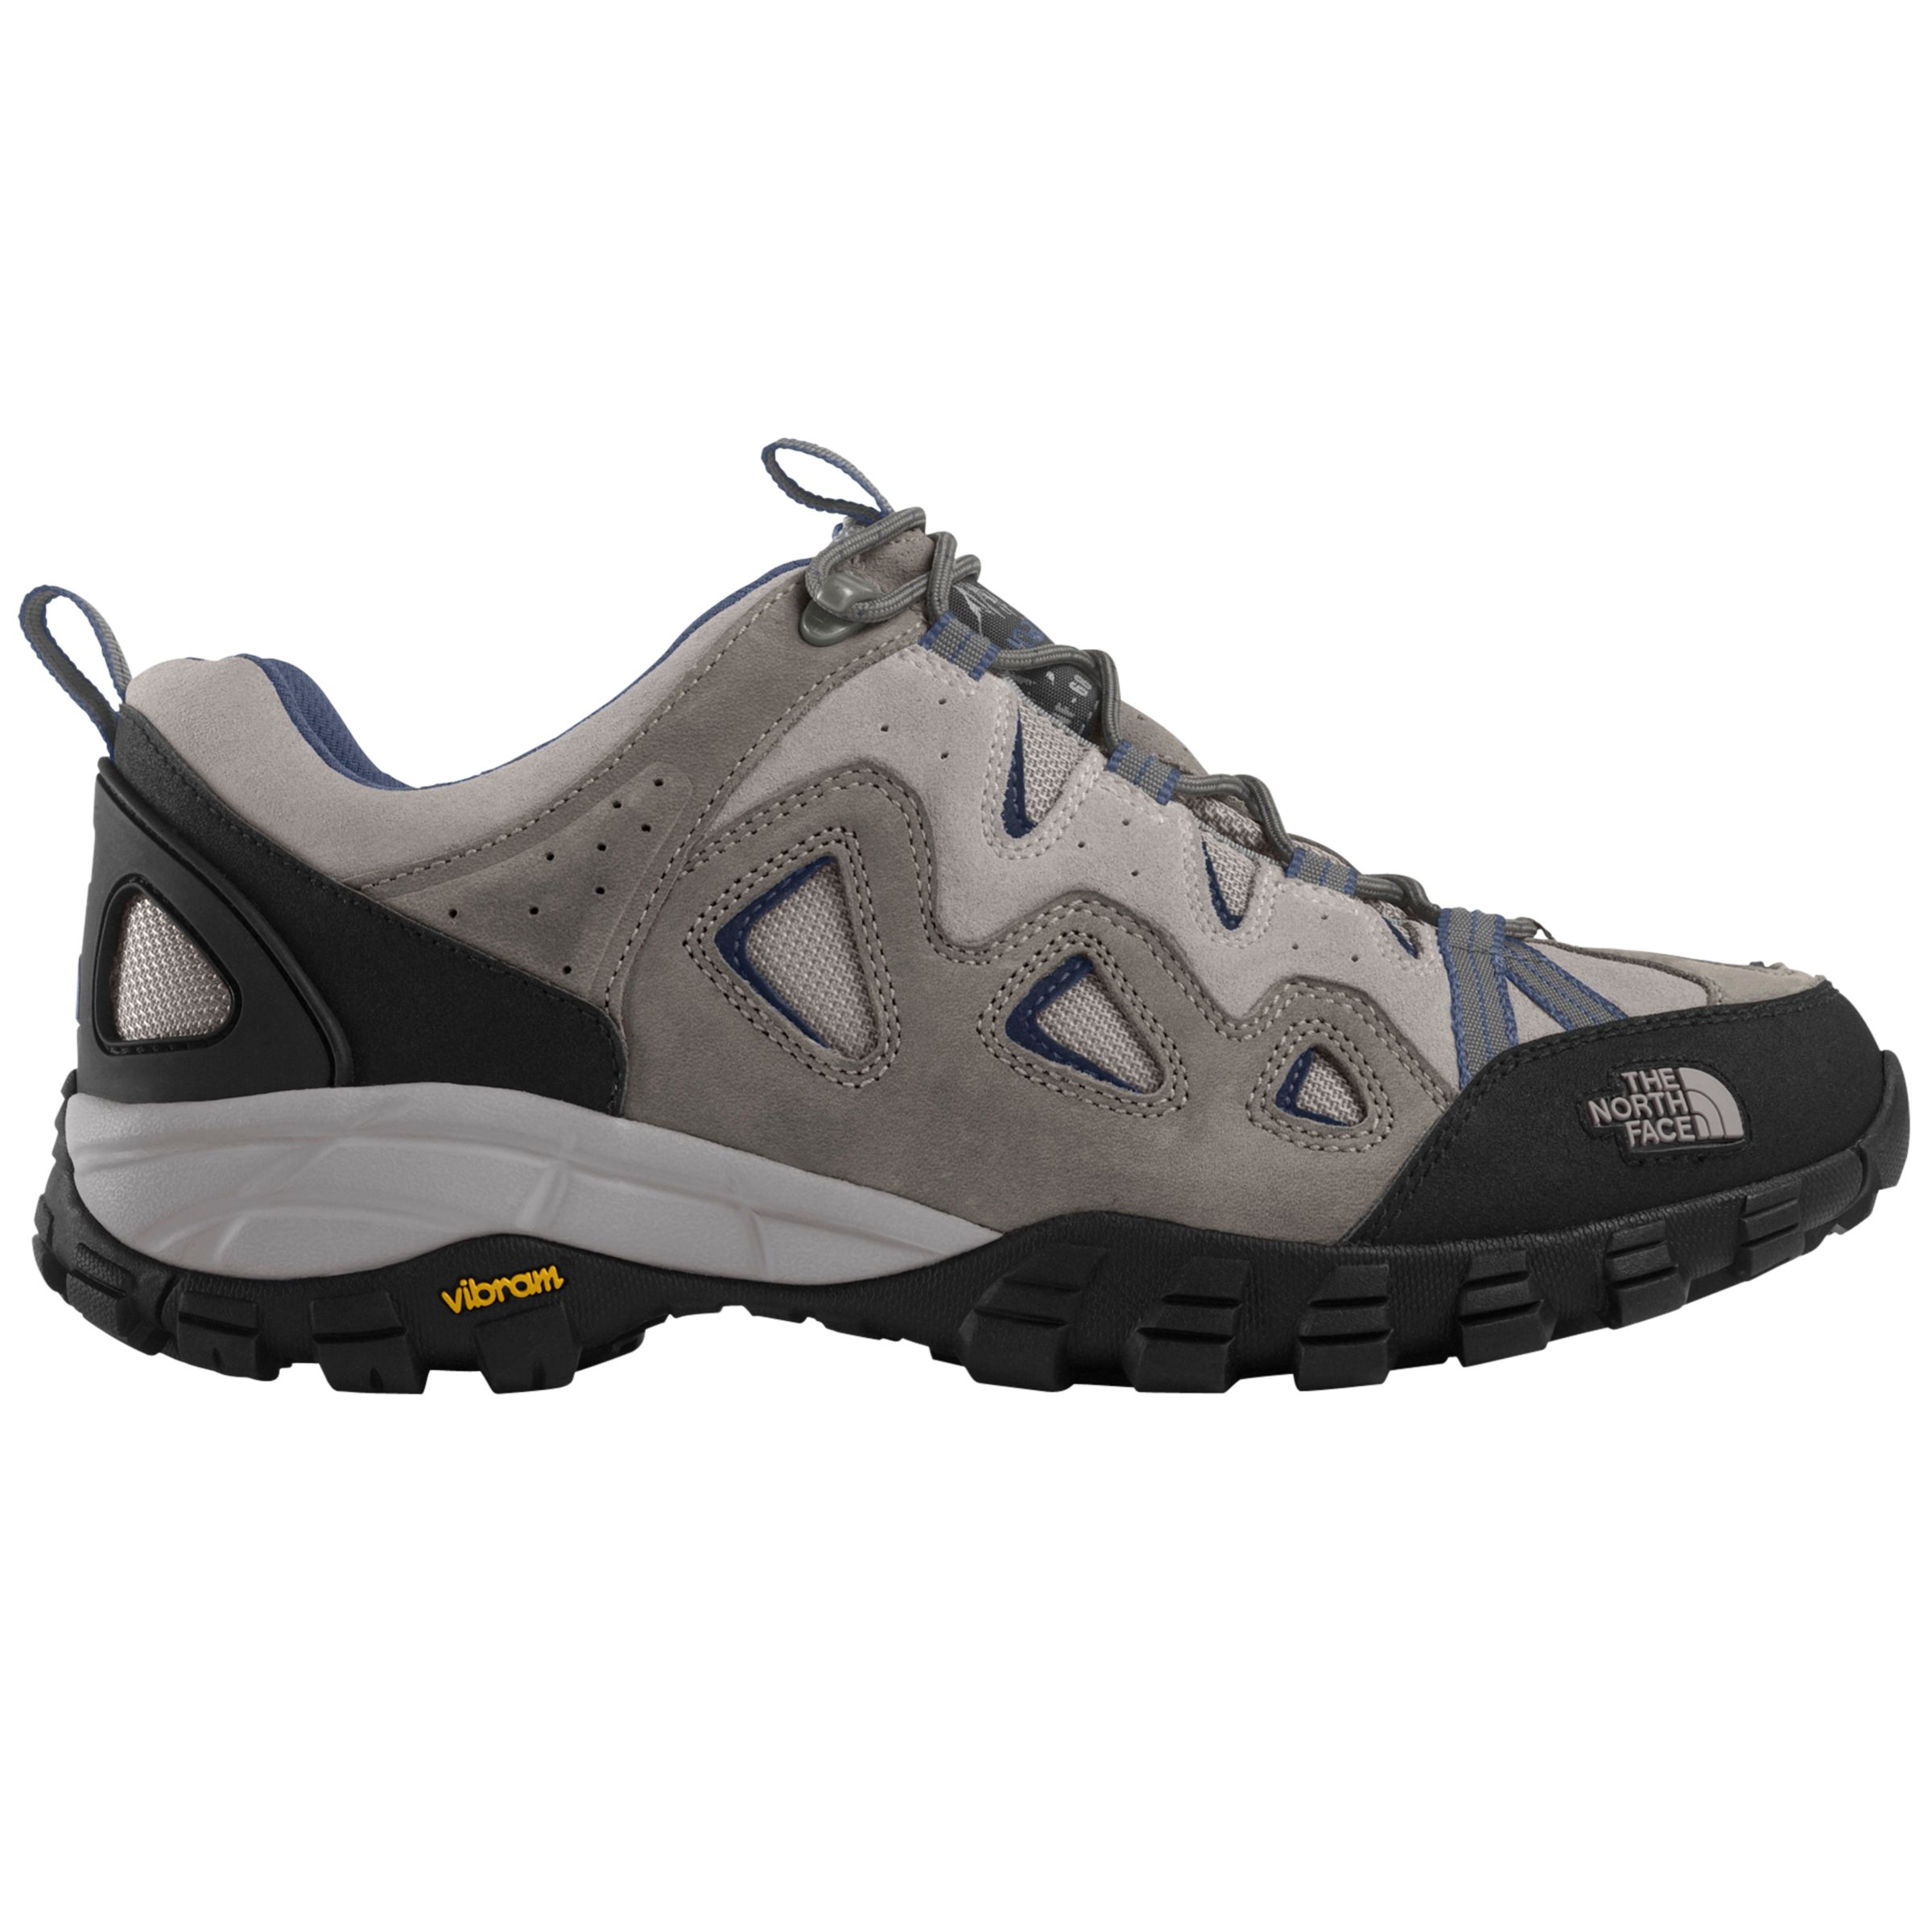 The North Face Activity Shoe, Grey/Blue, 9